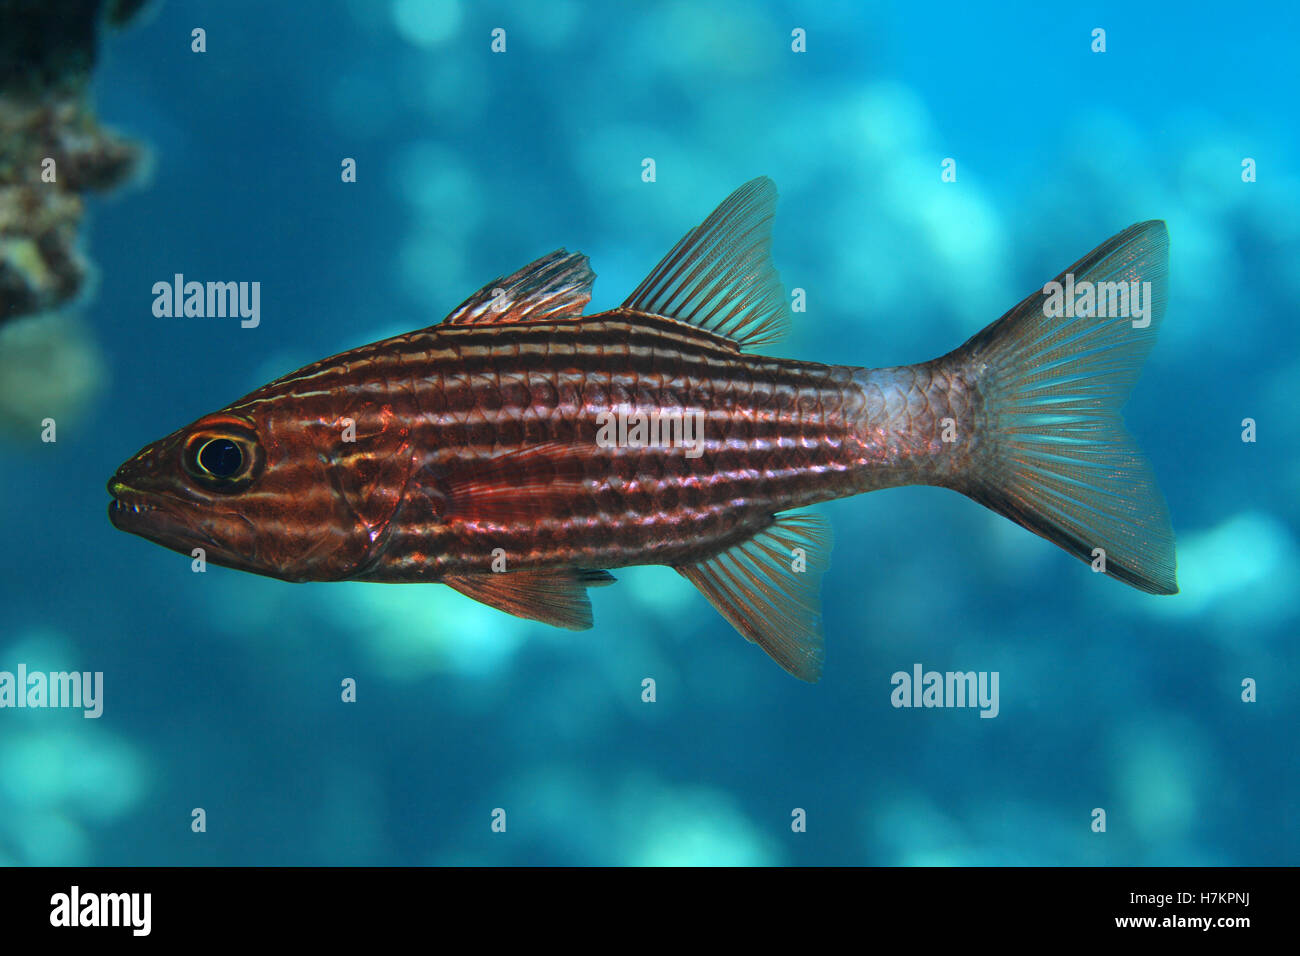 Large toothed cardinalfish (Cheilodipterus macrodon) underwater in the tropical coral reef of the red sea Stock Photo